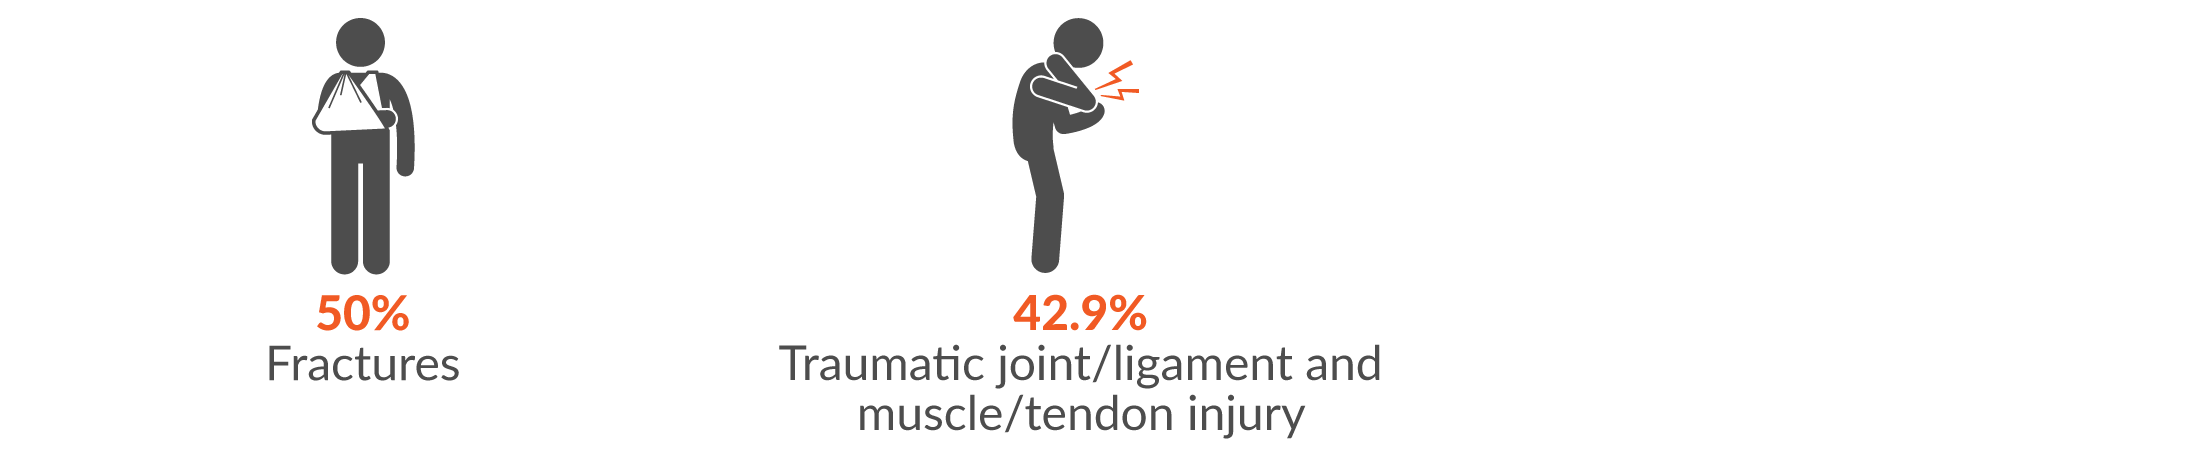 This infographic shows the main two injury groups resulting from falls, trips and slips of a person were 50% fractures and 42.9% traumatic joint/ligament and muscle/tendon injury.